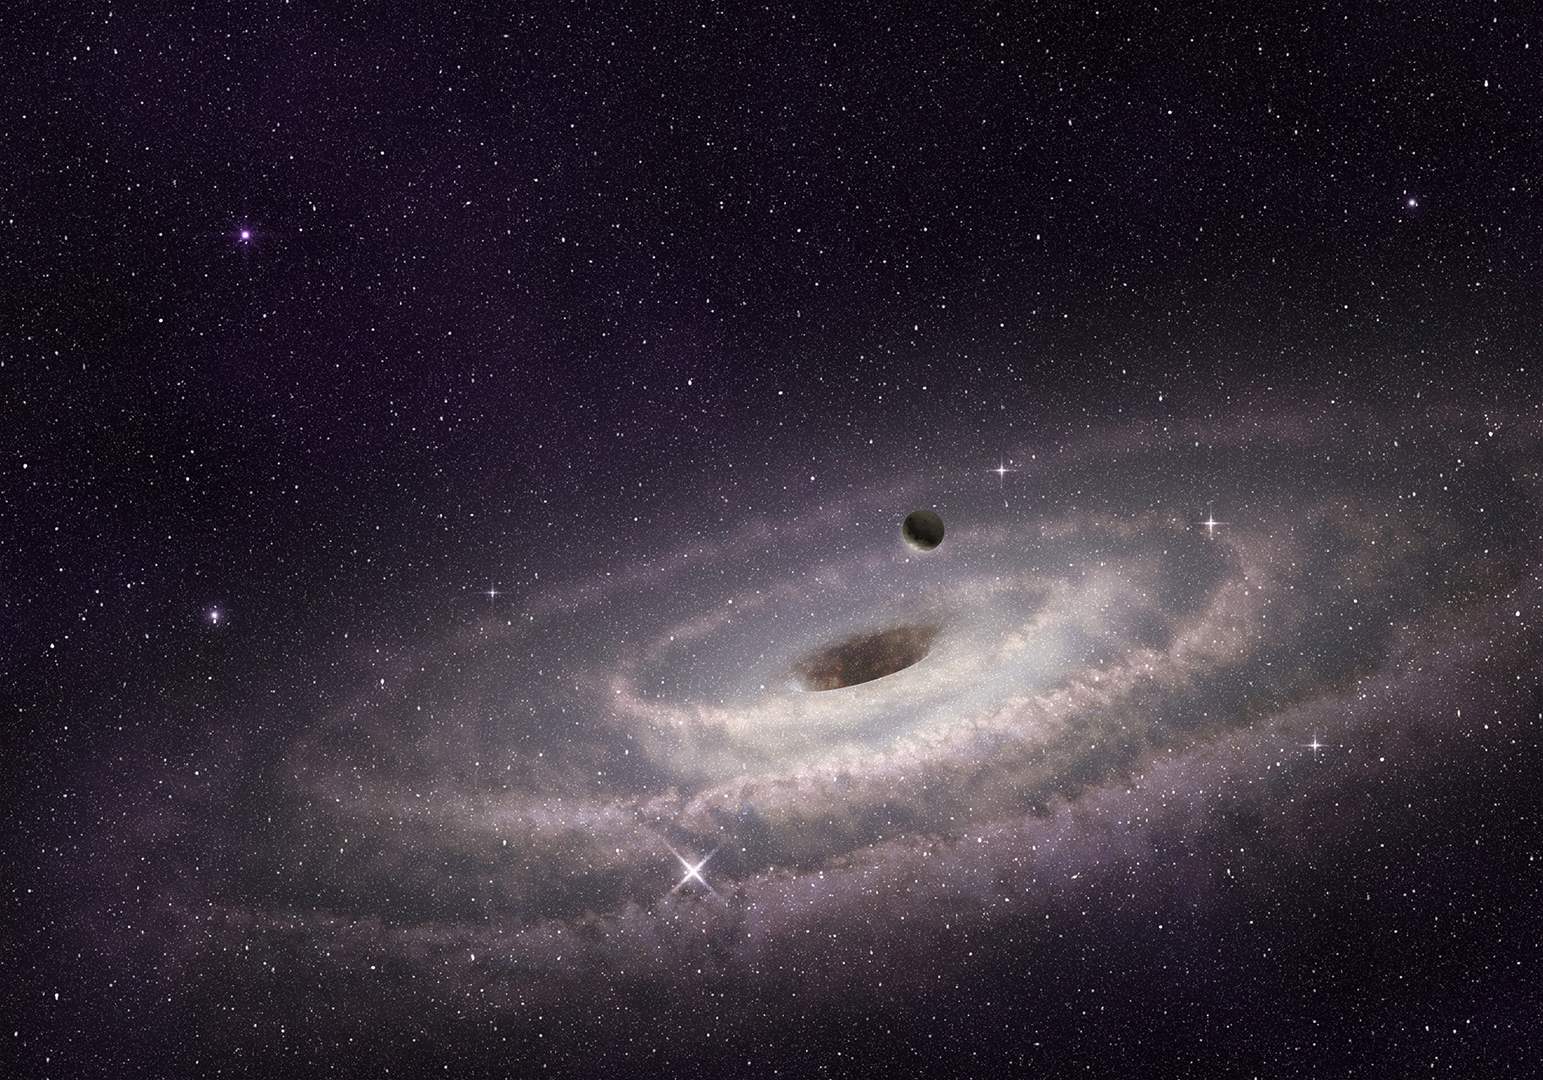 Astronomers discover massive radio galaxy 100 times larger than the Milky Way